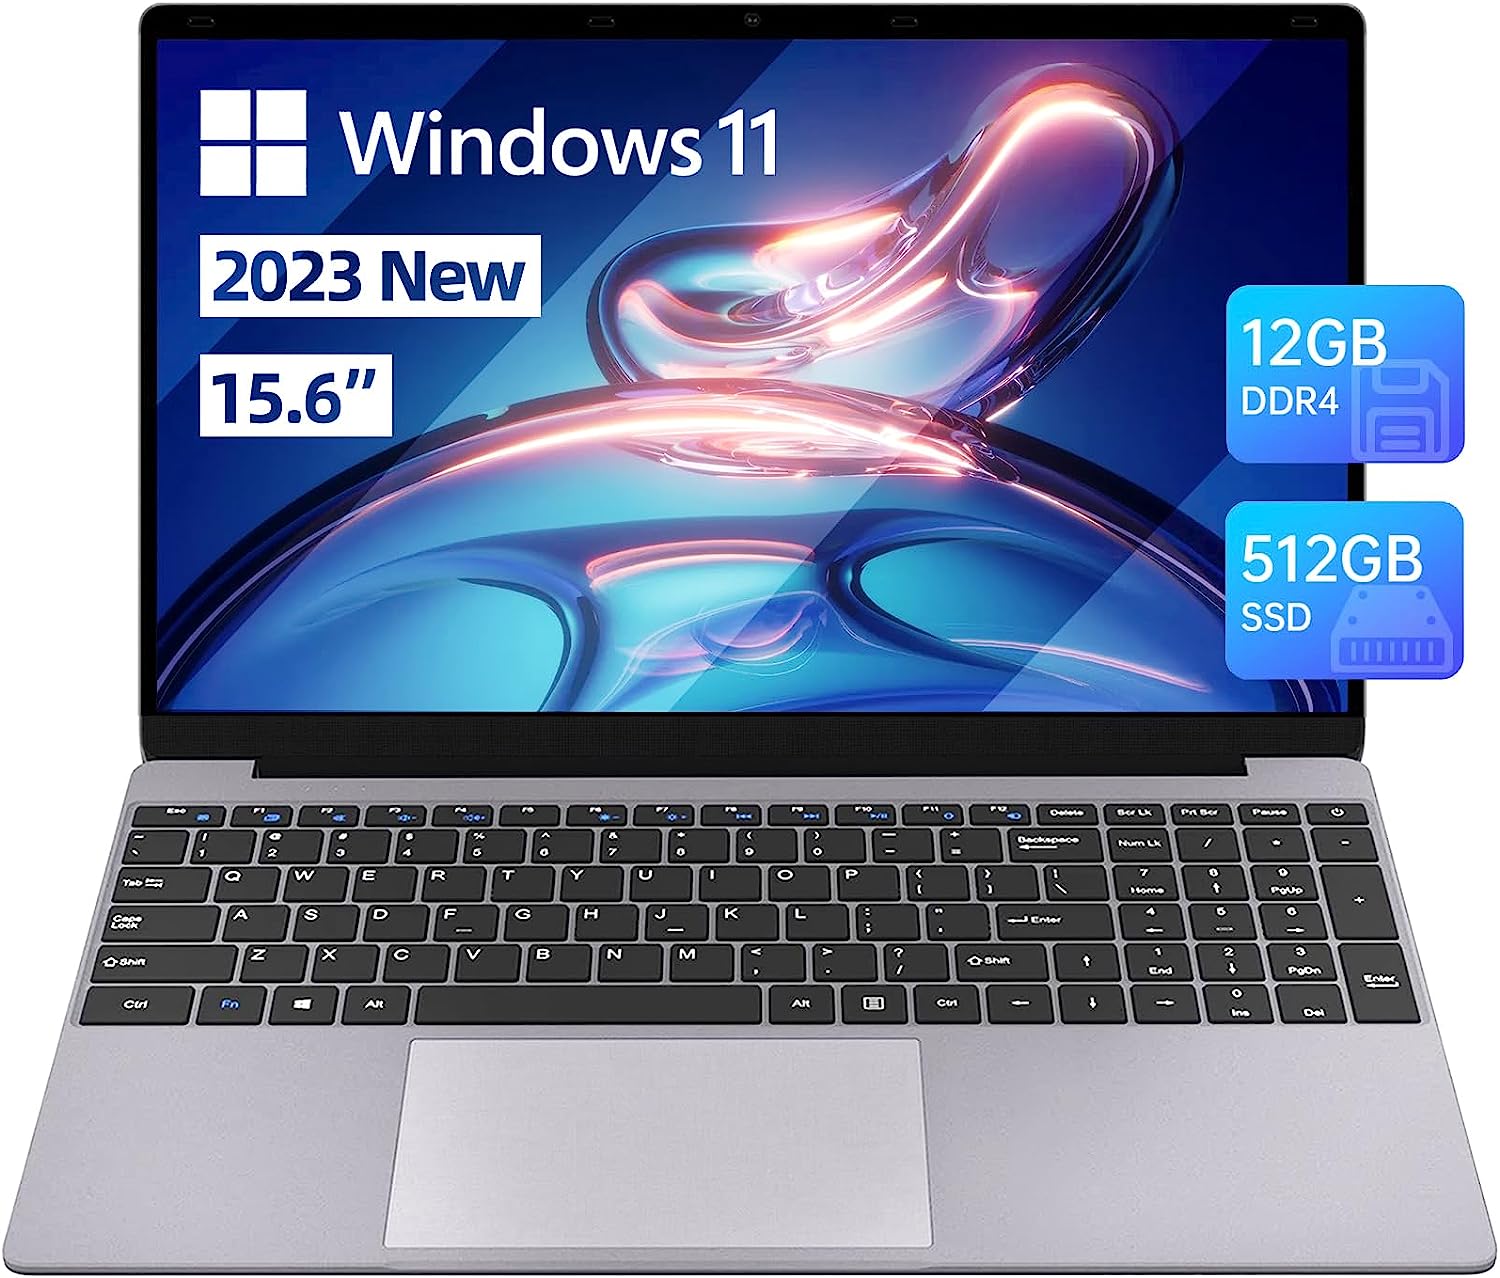 ApoloSign Laptop Computer, 15.6 Inch Windows 11 [...]